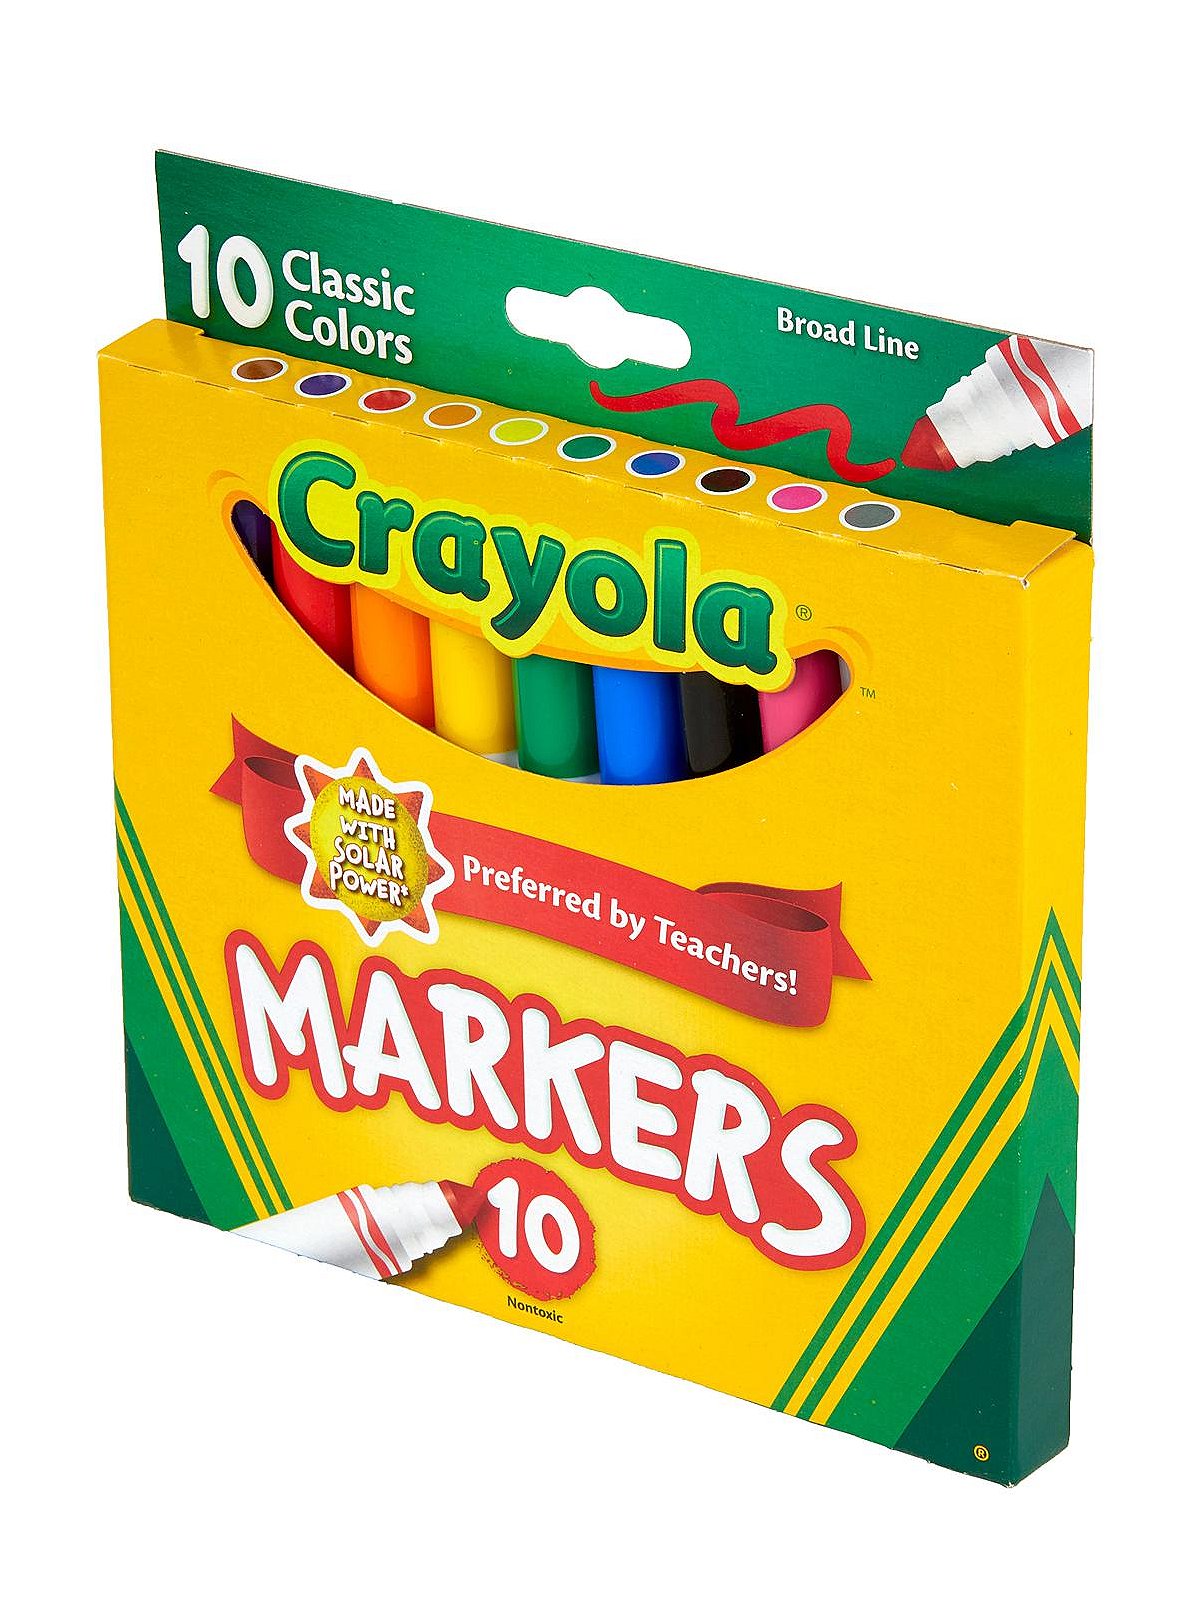 Colored Markers Kids Art Row On Stock Photo 1310377387